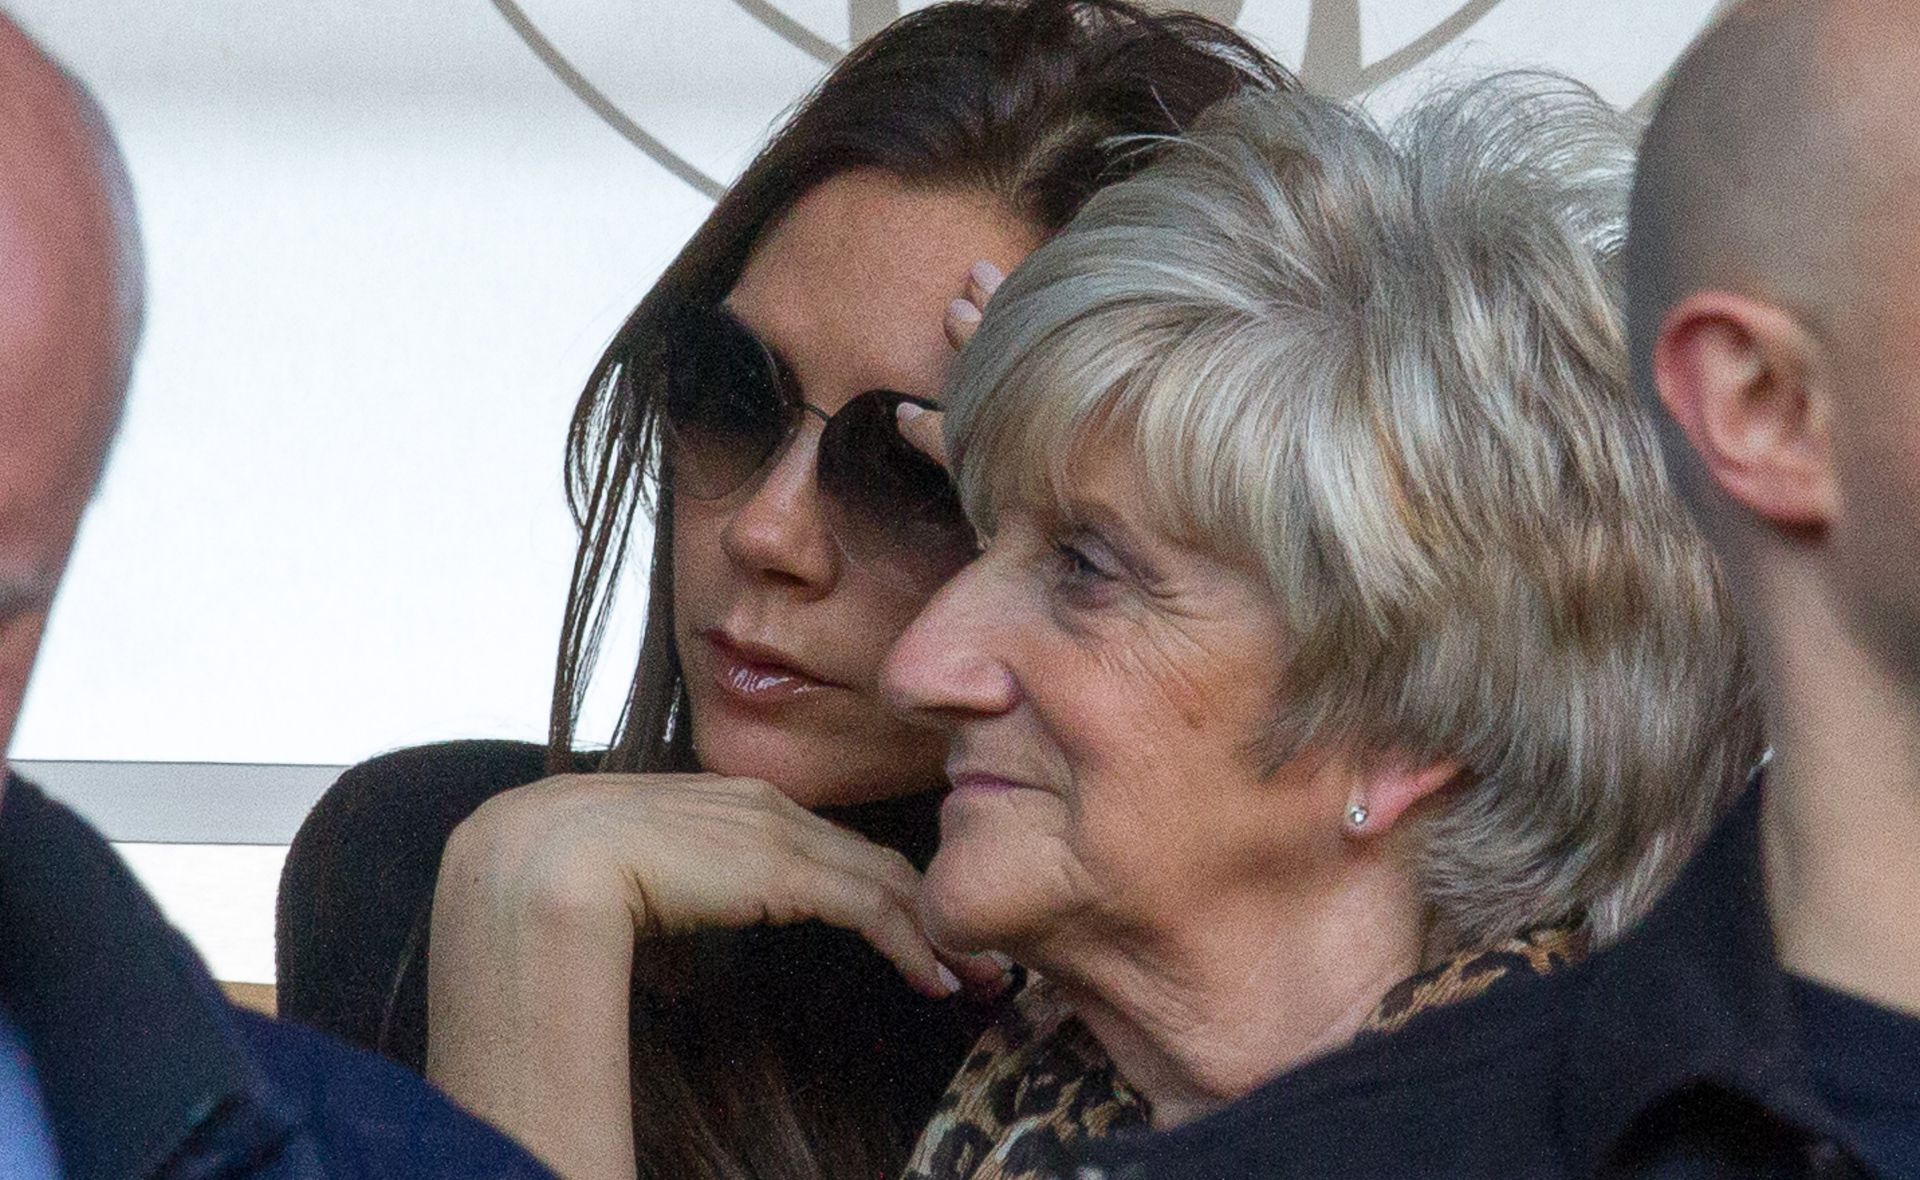 David Beckham’s mother reveals in his new documentary that she did not like Victoria Beckham